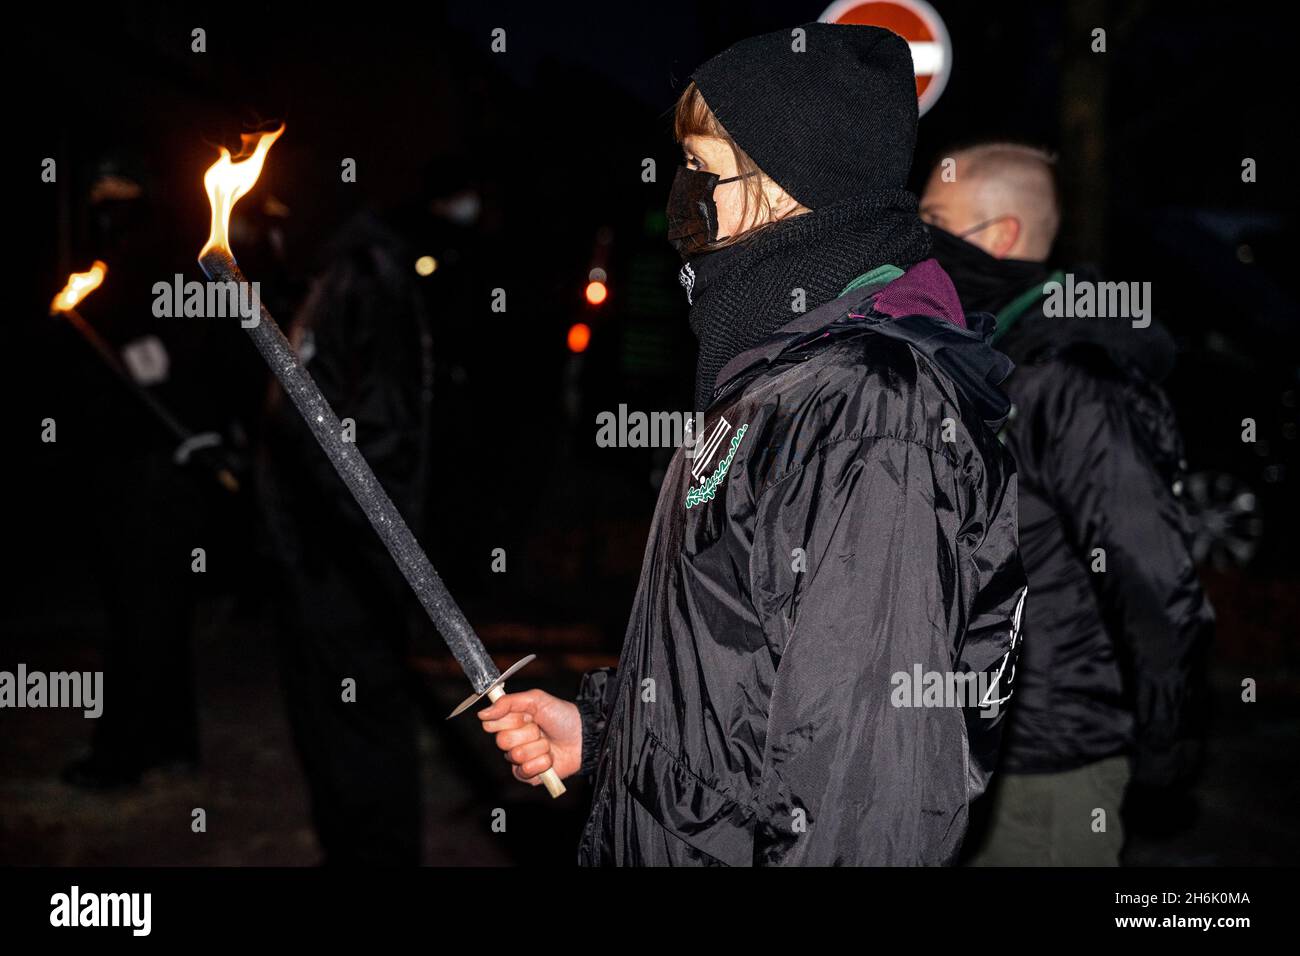 Wunsiedel, Deutschland. 13th Nov, 2021. On November 13, 2021 a torch march of neo-nazis of the III. Weg (third way) took place in Wunsiedel, Upper Franconia, Germany. The far-right protest was accompanied by 450 counter protestors of the initiative NichtLangFackeln. Wunsiedel is the place where Adolf Hitler's deputy Rudolf Hess was buried until 2011. (Photo by Alexander Pohl/Sipa USA) Credit: Sipa USA/Alamy Live News Stock Photo